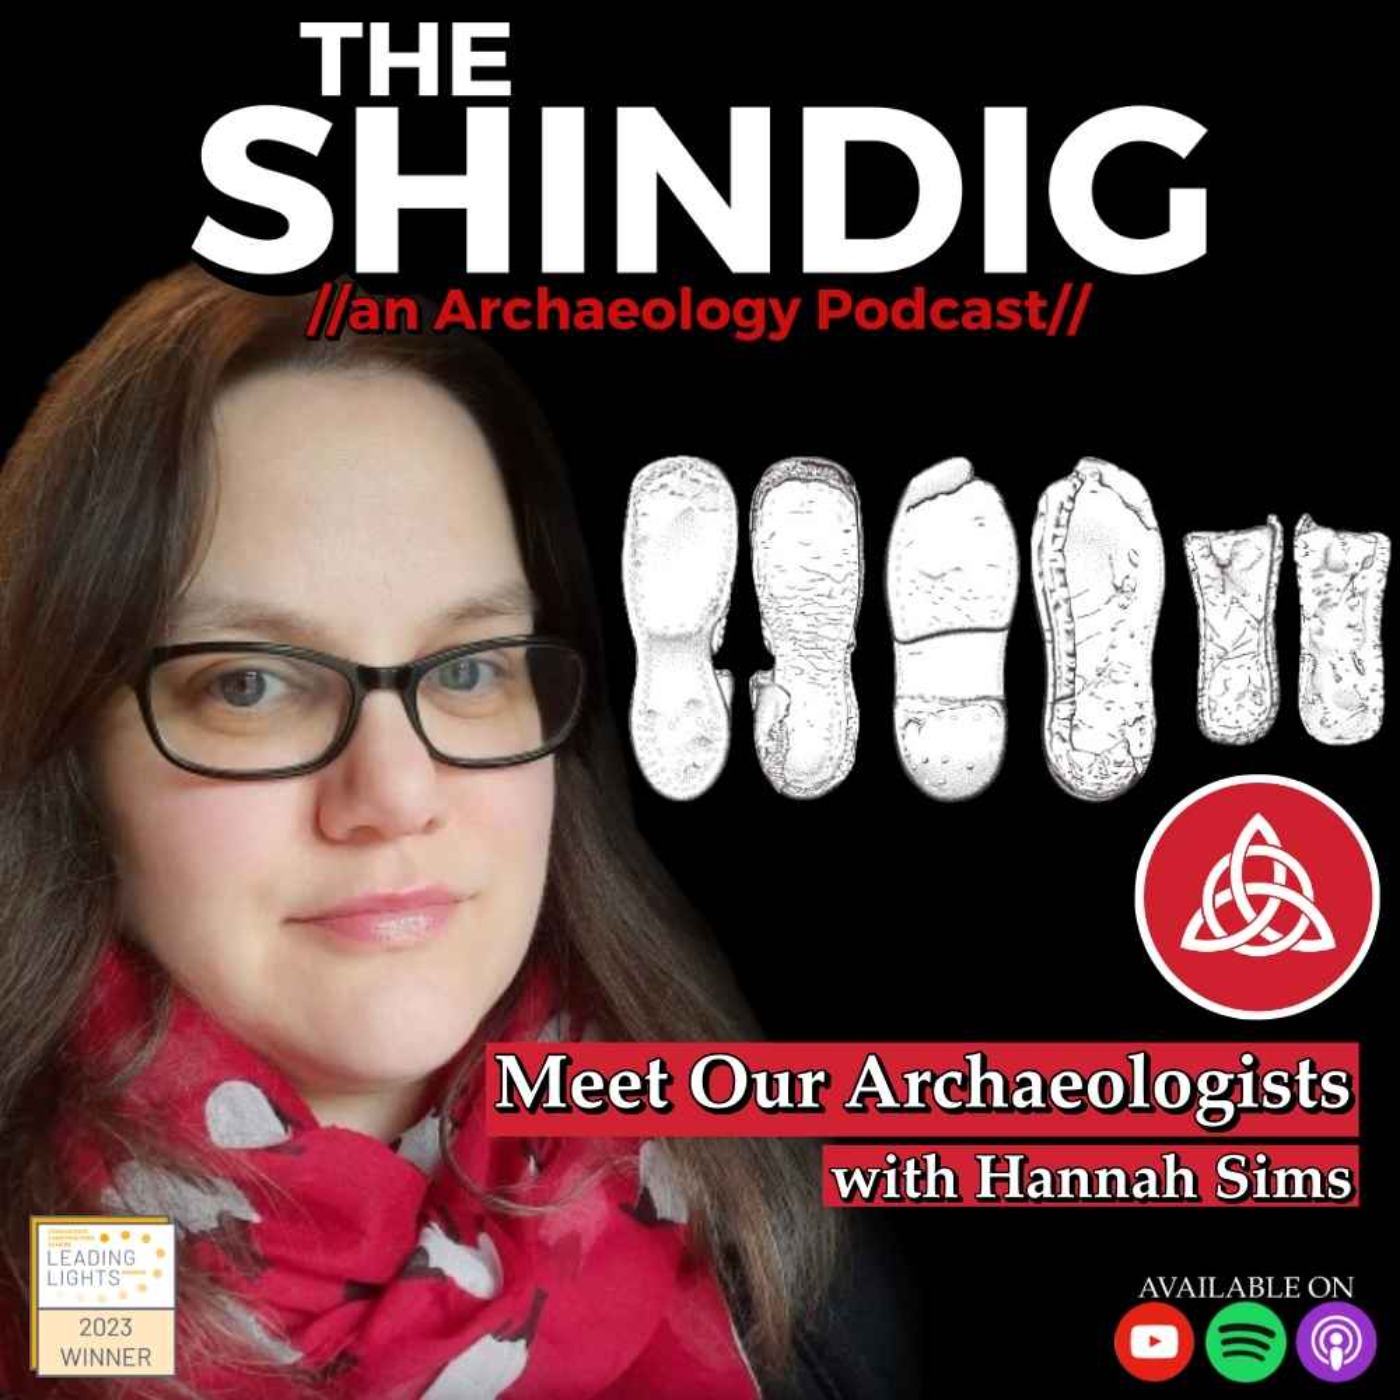 Meet our Archaeologists - with Hannah Sims